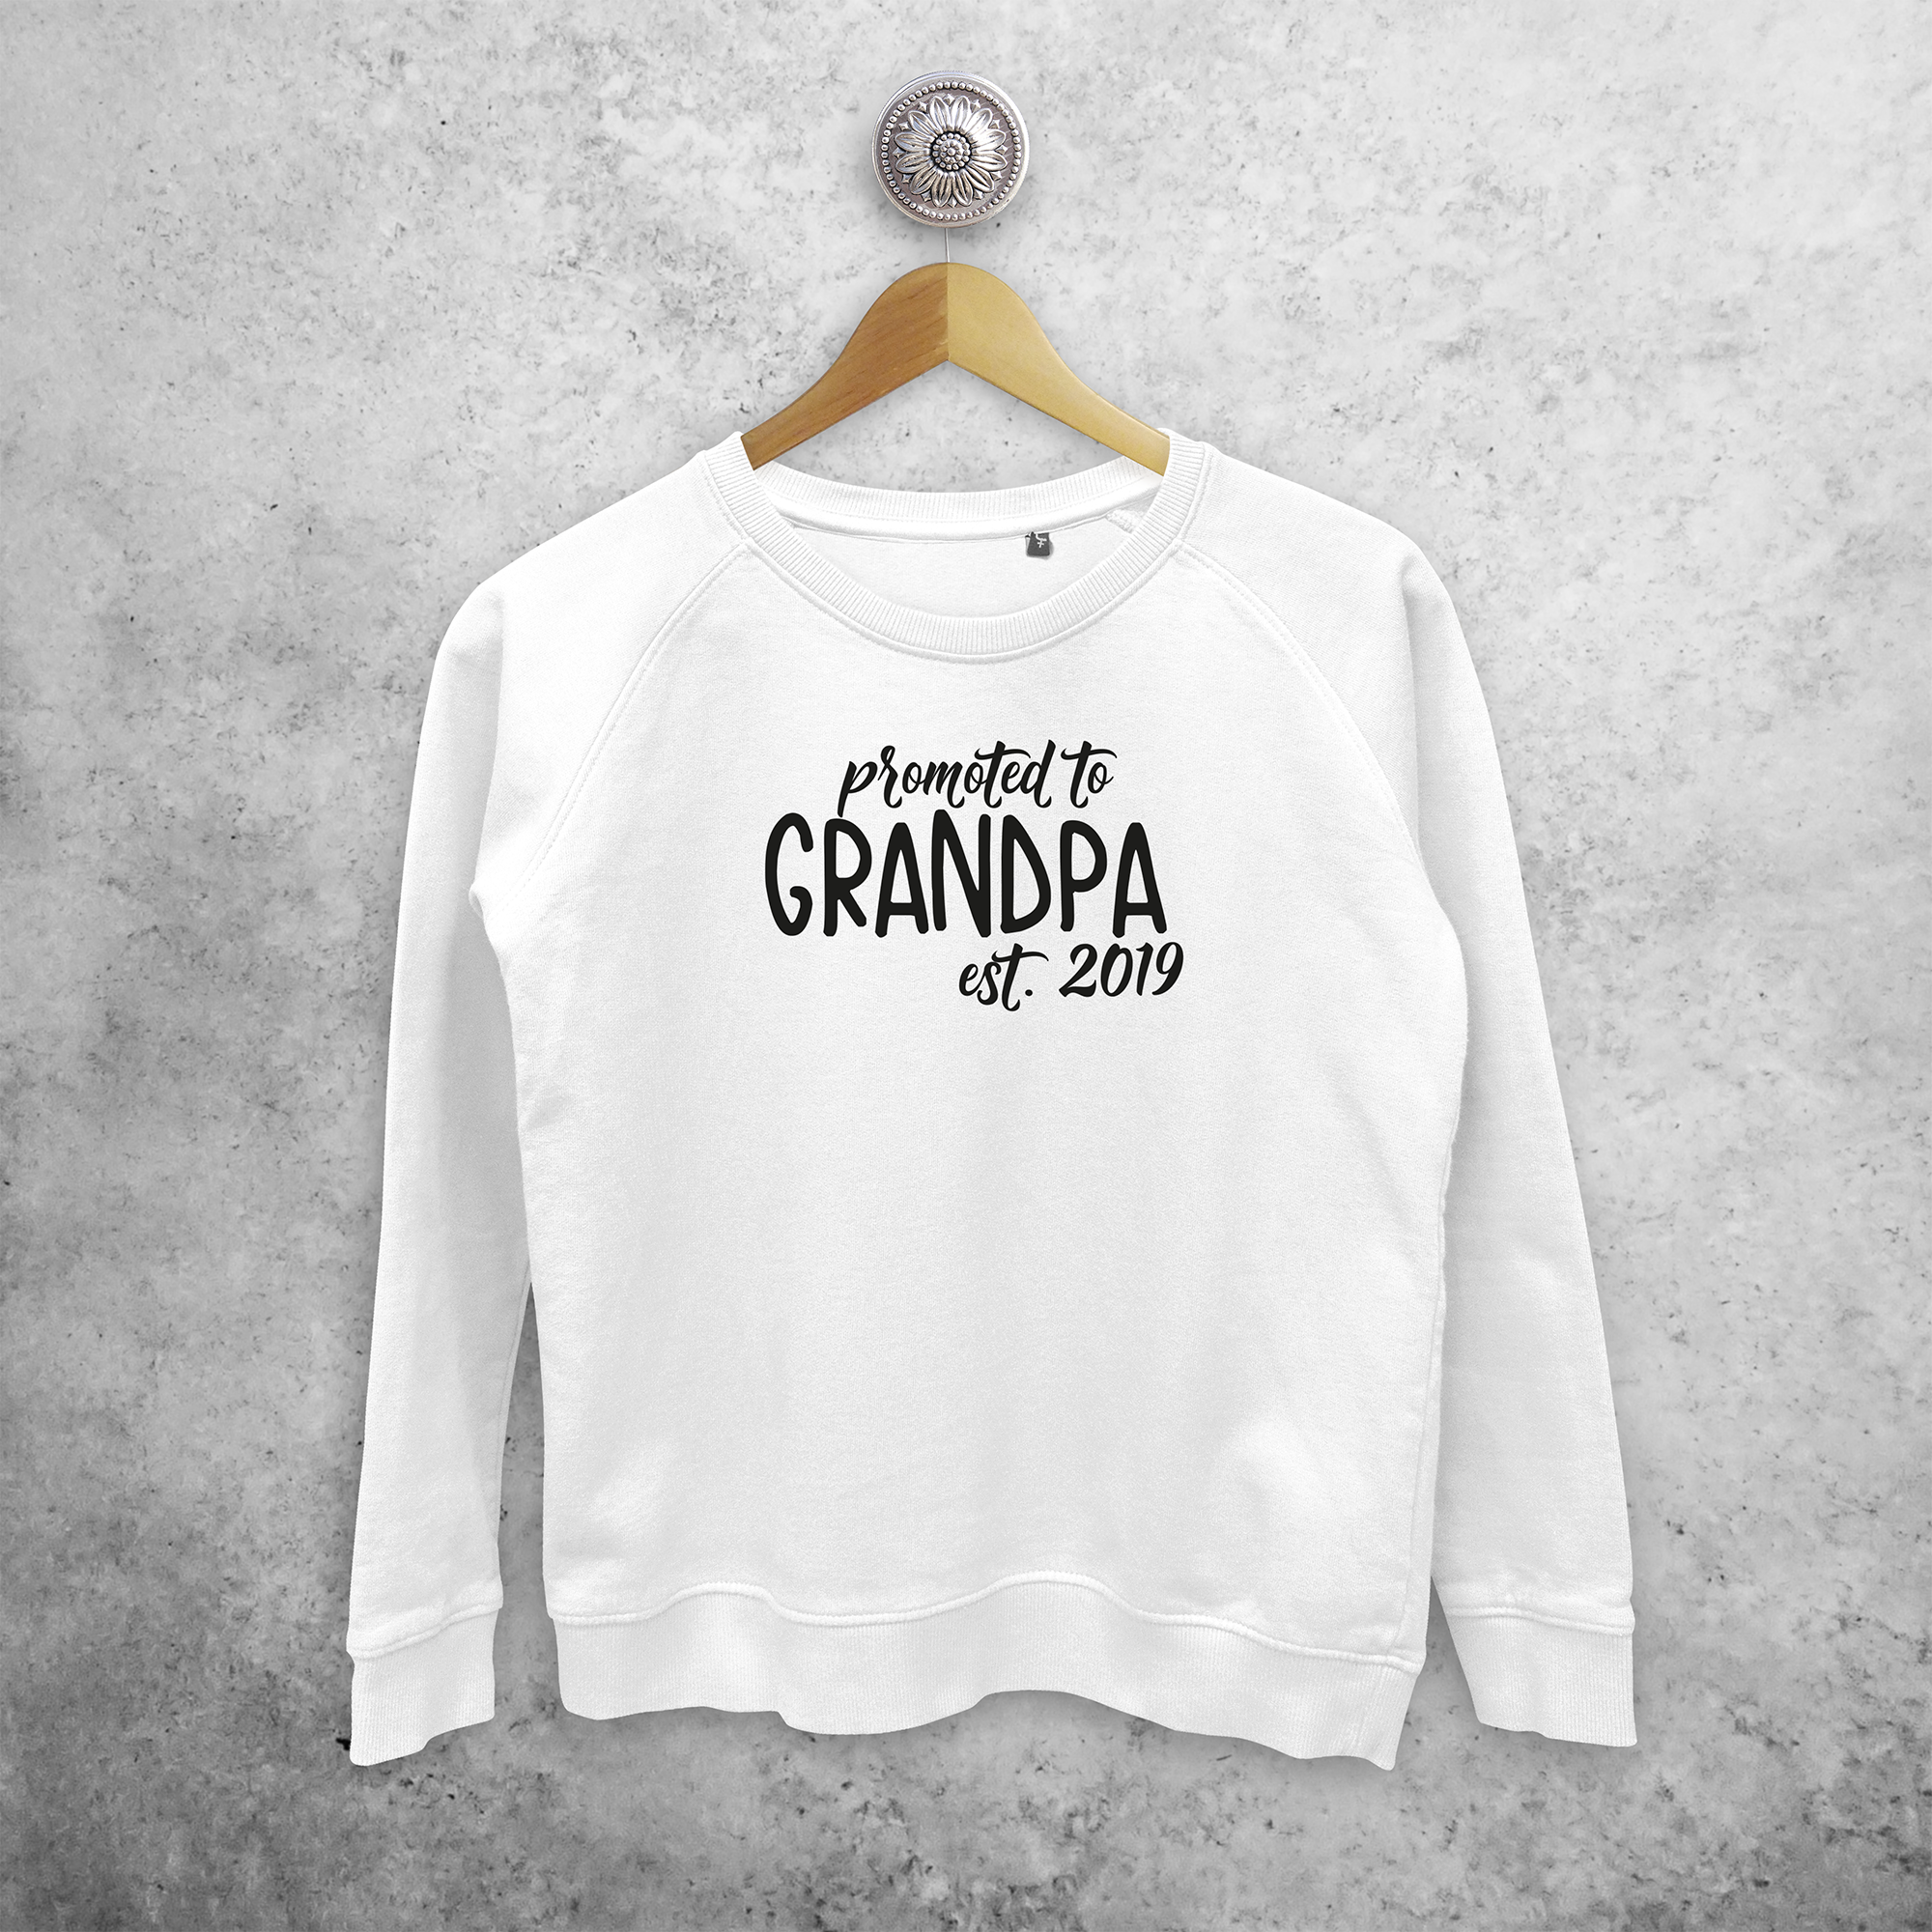 'Promoted to grandpa' sweater